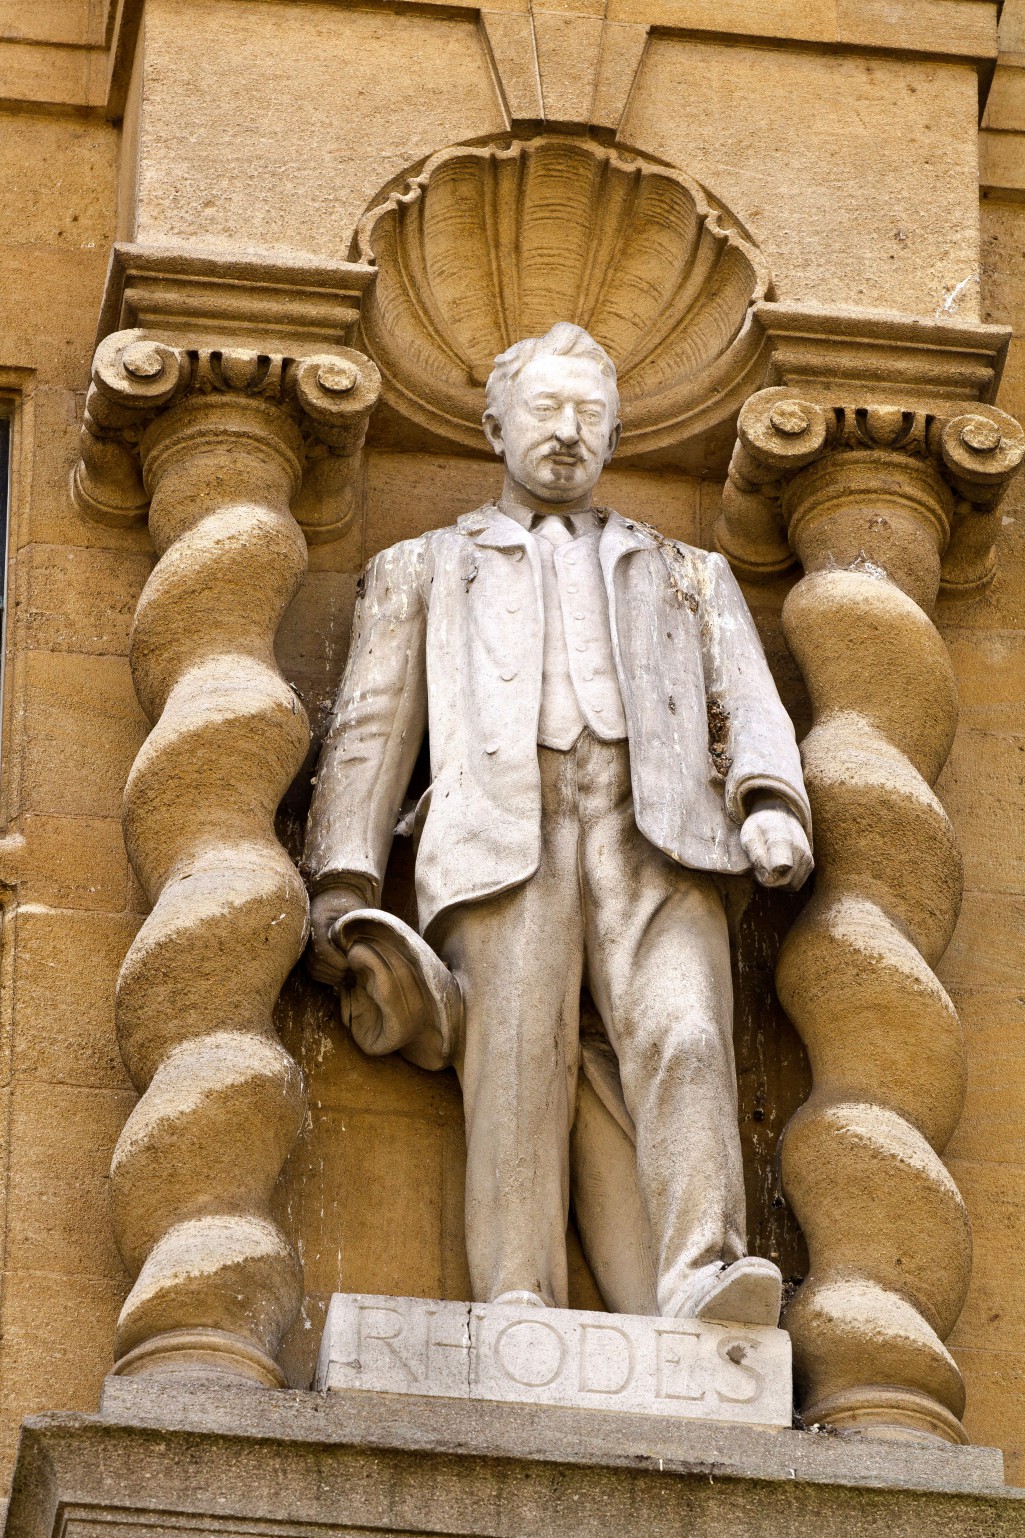 Statue of Cecil Rhodes on the façade of Oriel College, Oxford on the High Street, built in 1911